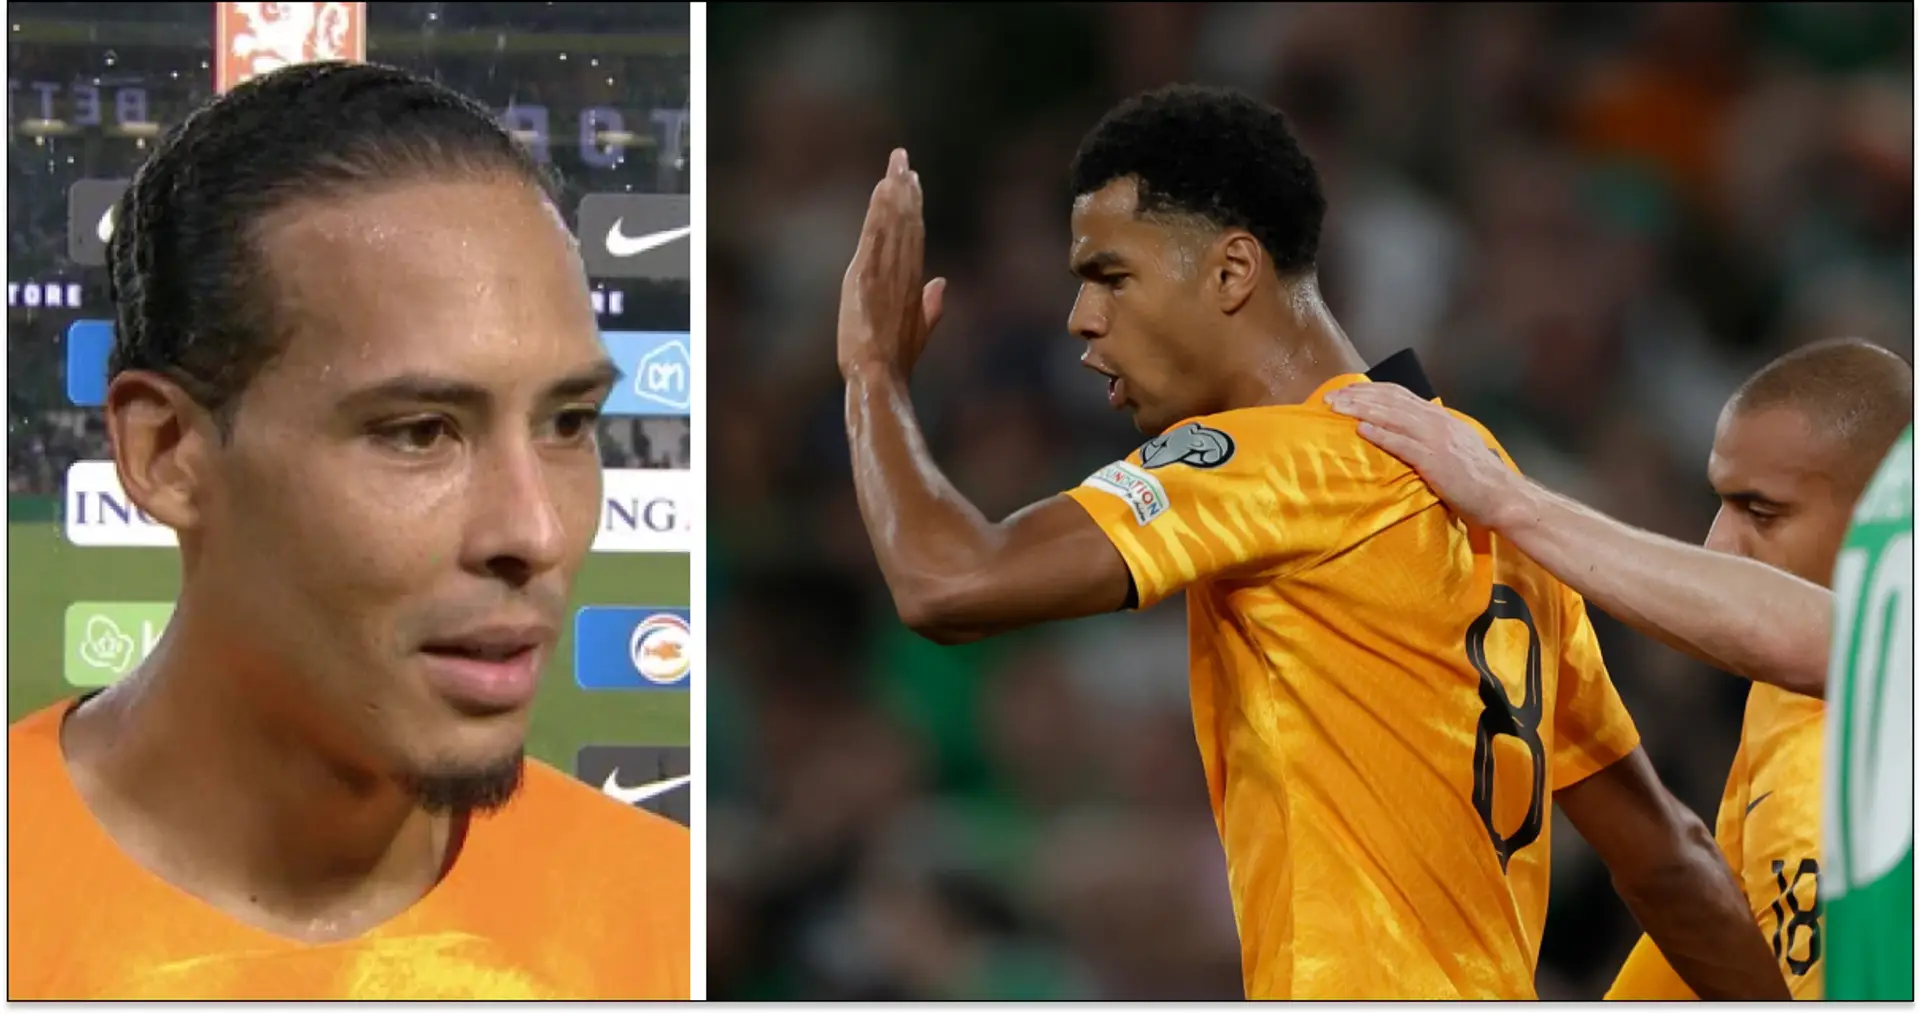 Gakpo scores for Netherlands again, Van Dijk at heart of penalty controversy